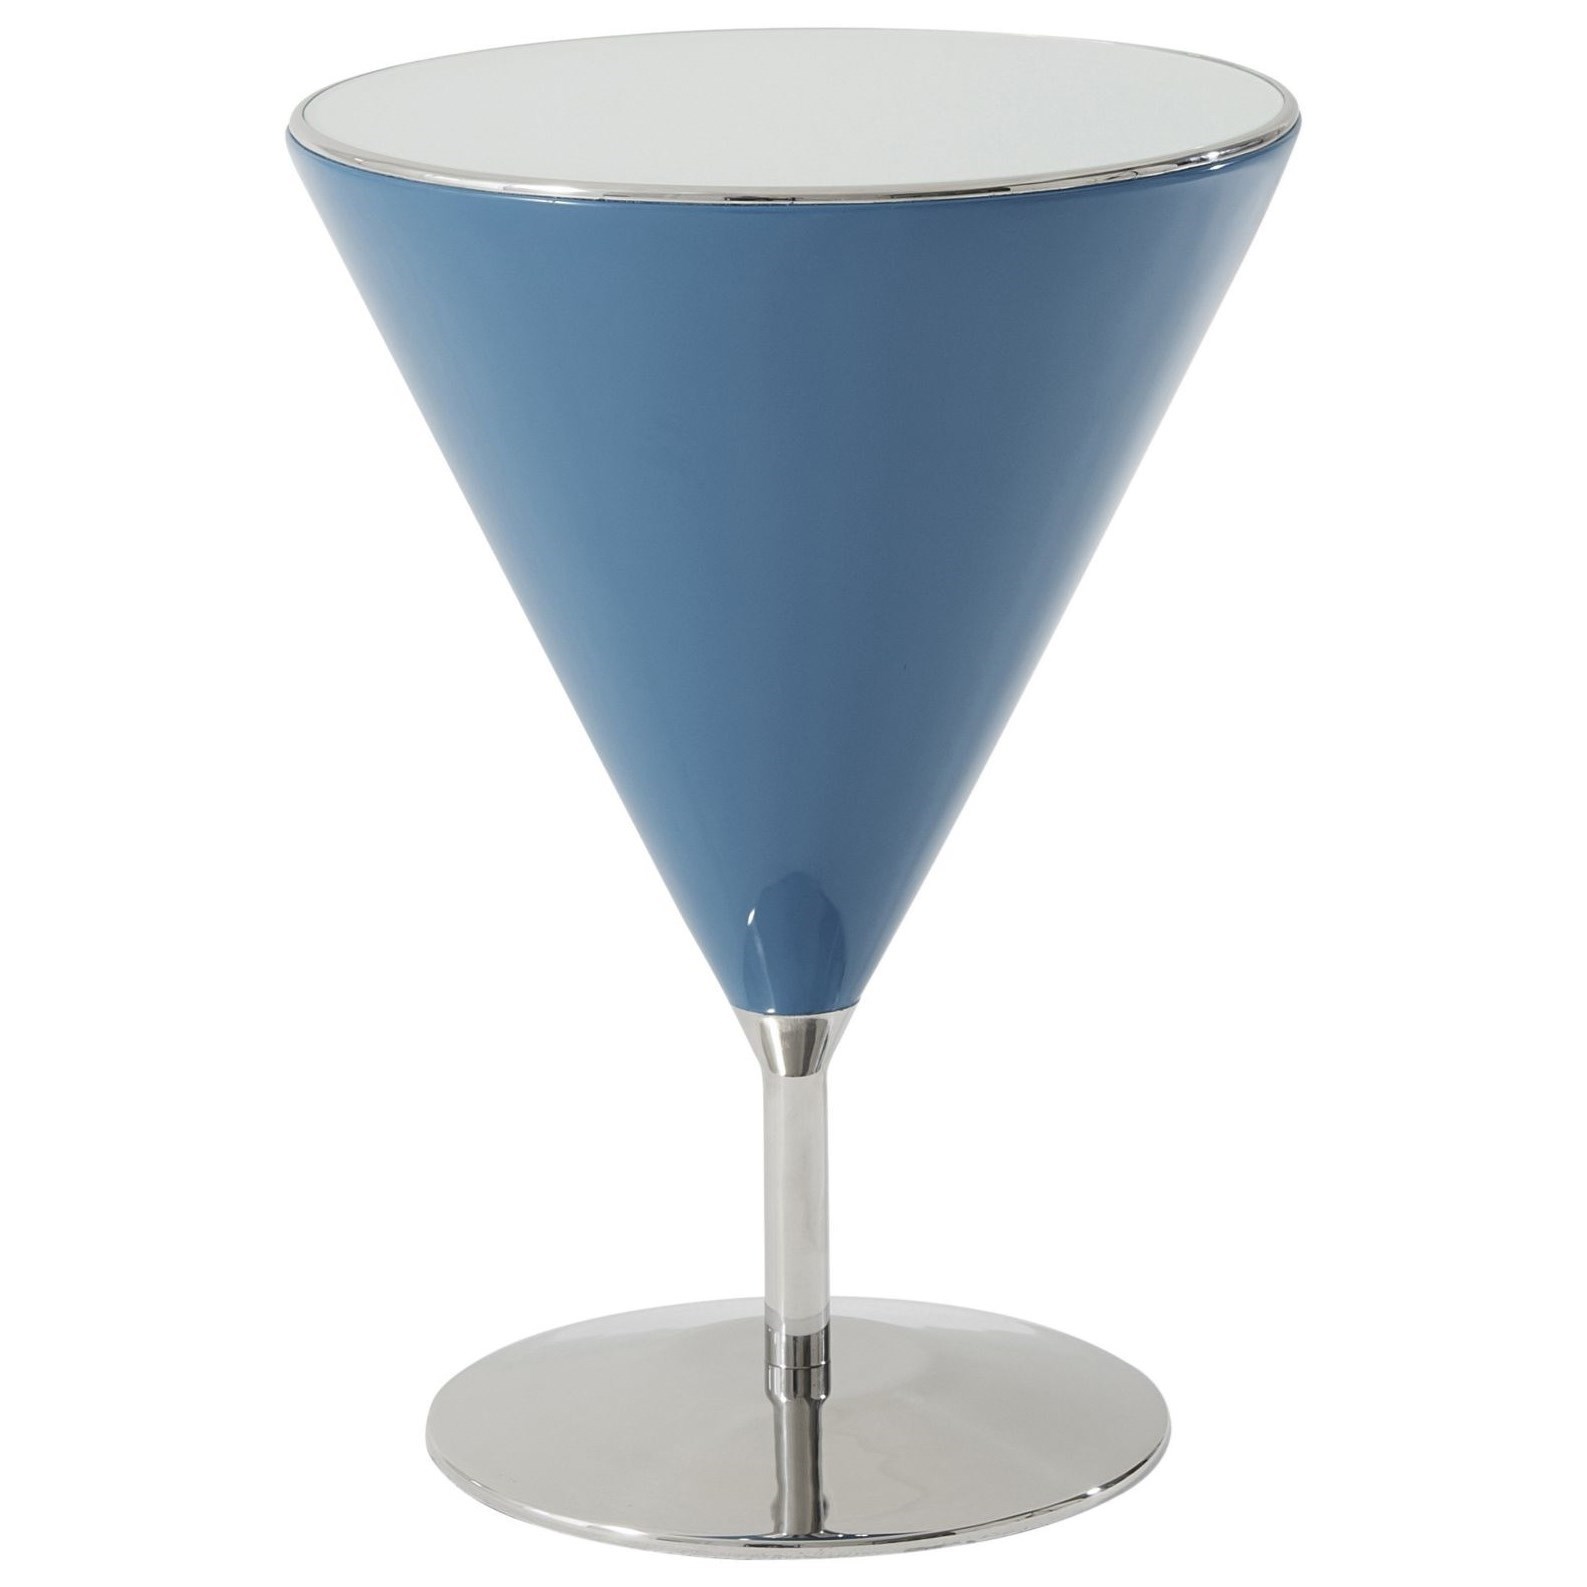 Mixology Accent Table with Aquamarine Finish and Stainless Steel Base